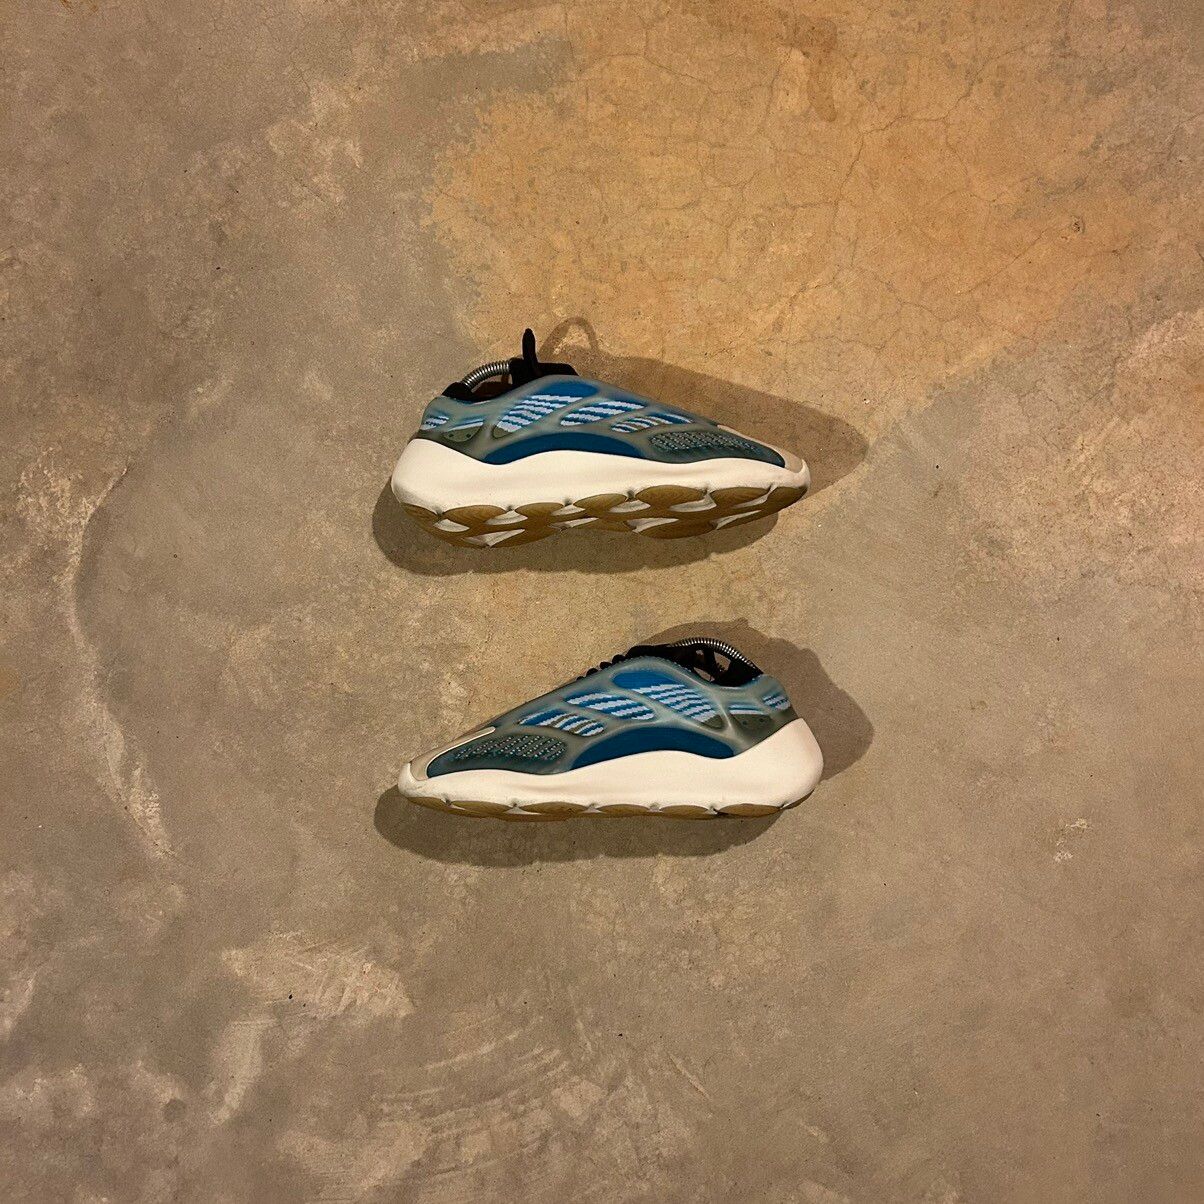 Pre-owned Adidas X Kanye West Adidas Yeezy 700 V3 Arzareth 2020 Us 8.5 Shoes In Blue